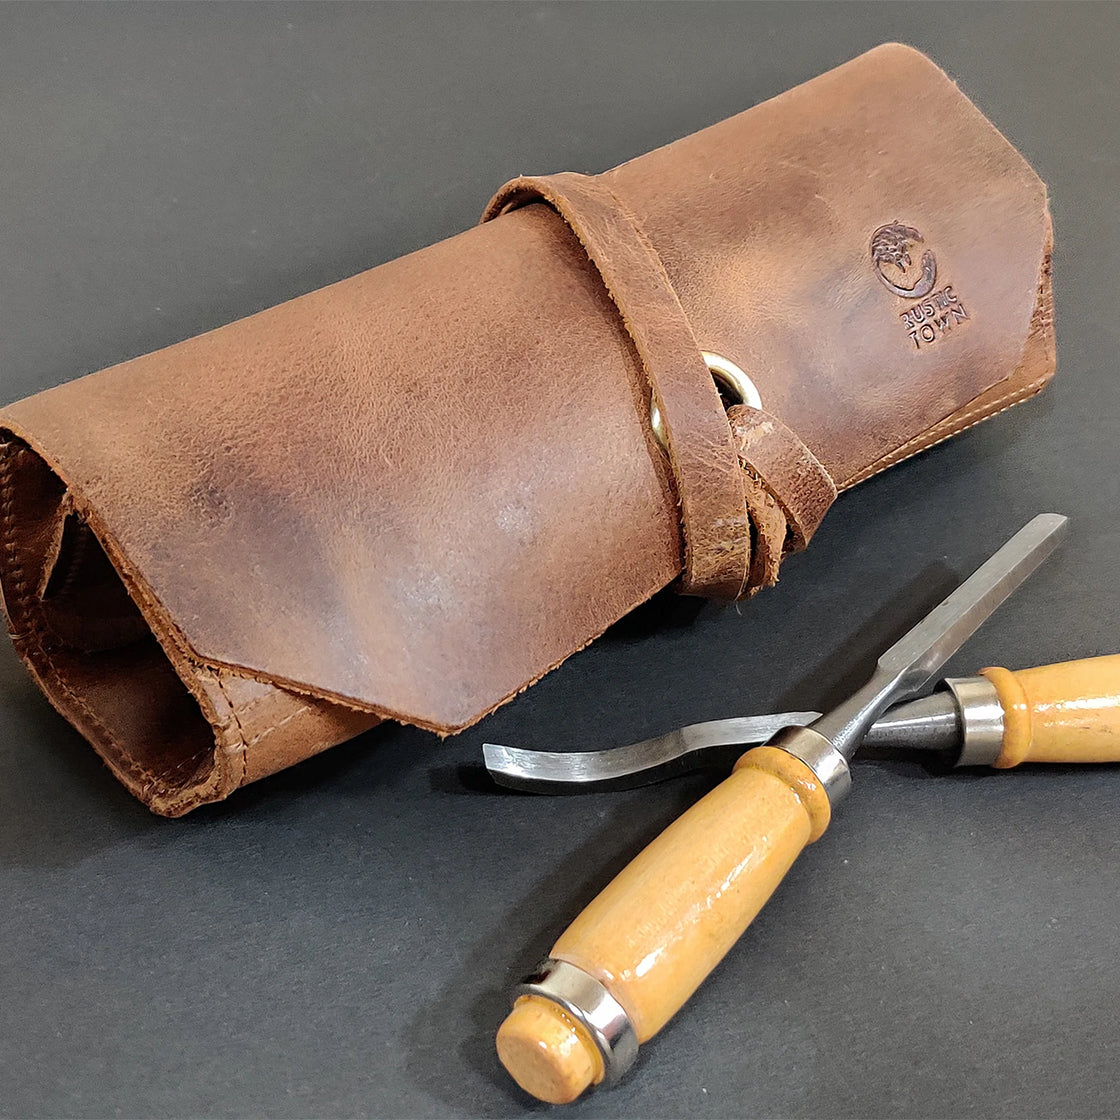 Full Grain Leather Tool Roll Up Pouch- Handcrafted Tool Kit (10 Slots)